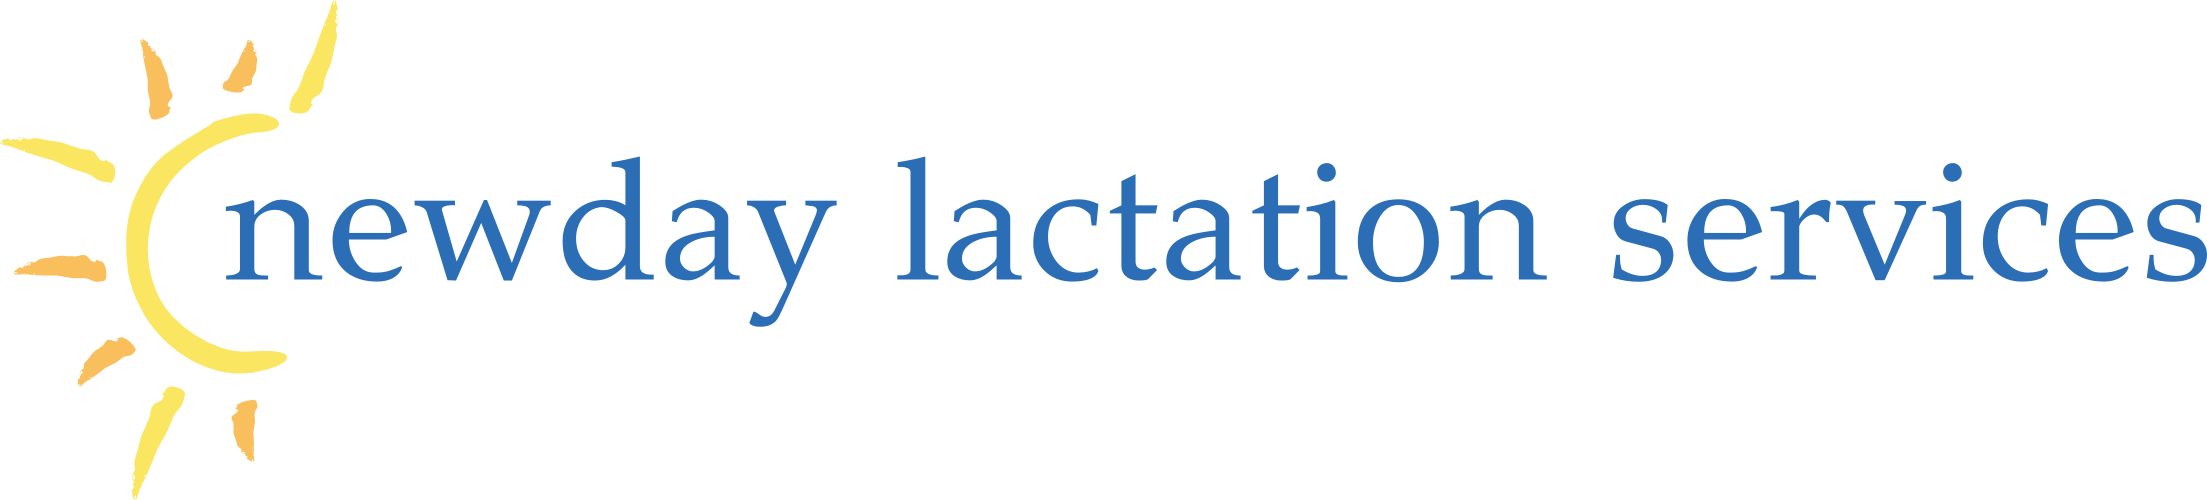 Newday Lactation Services